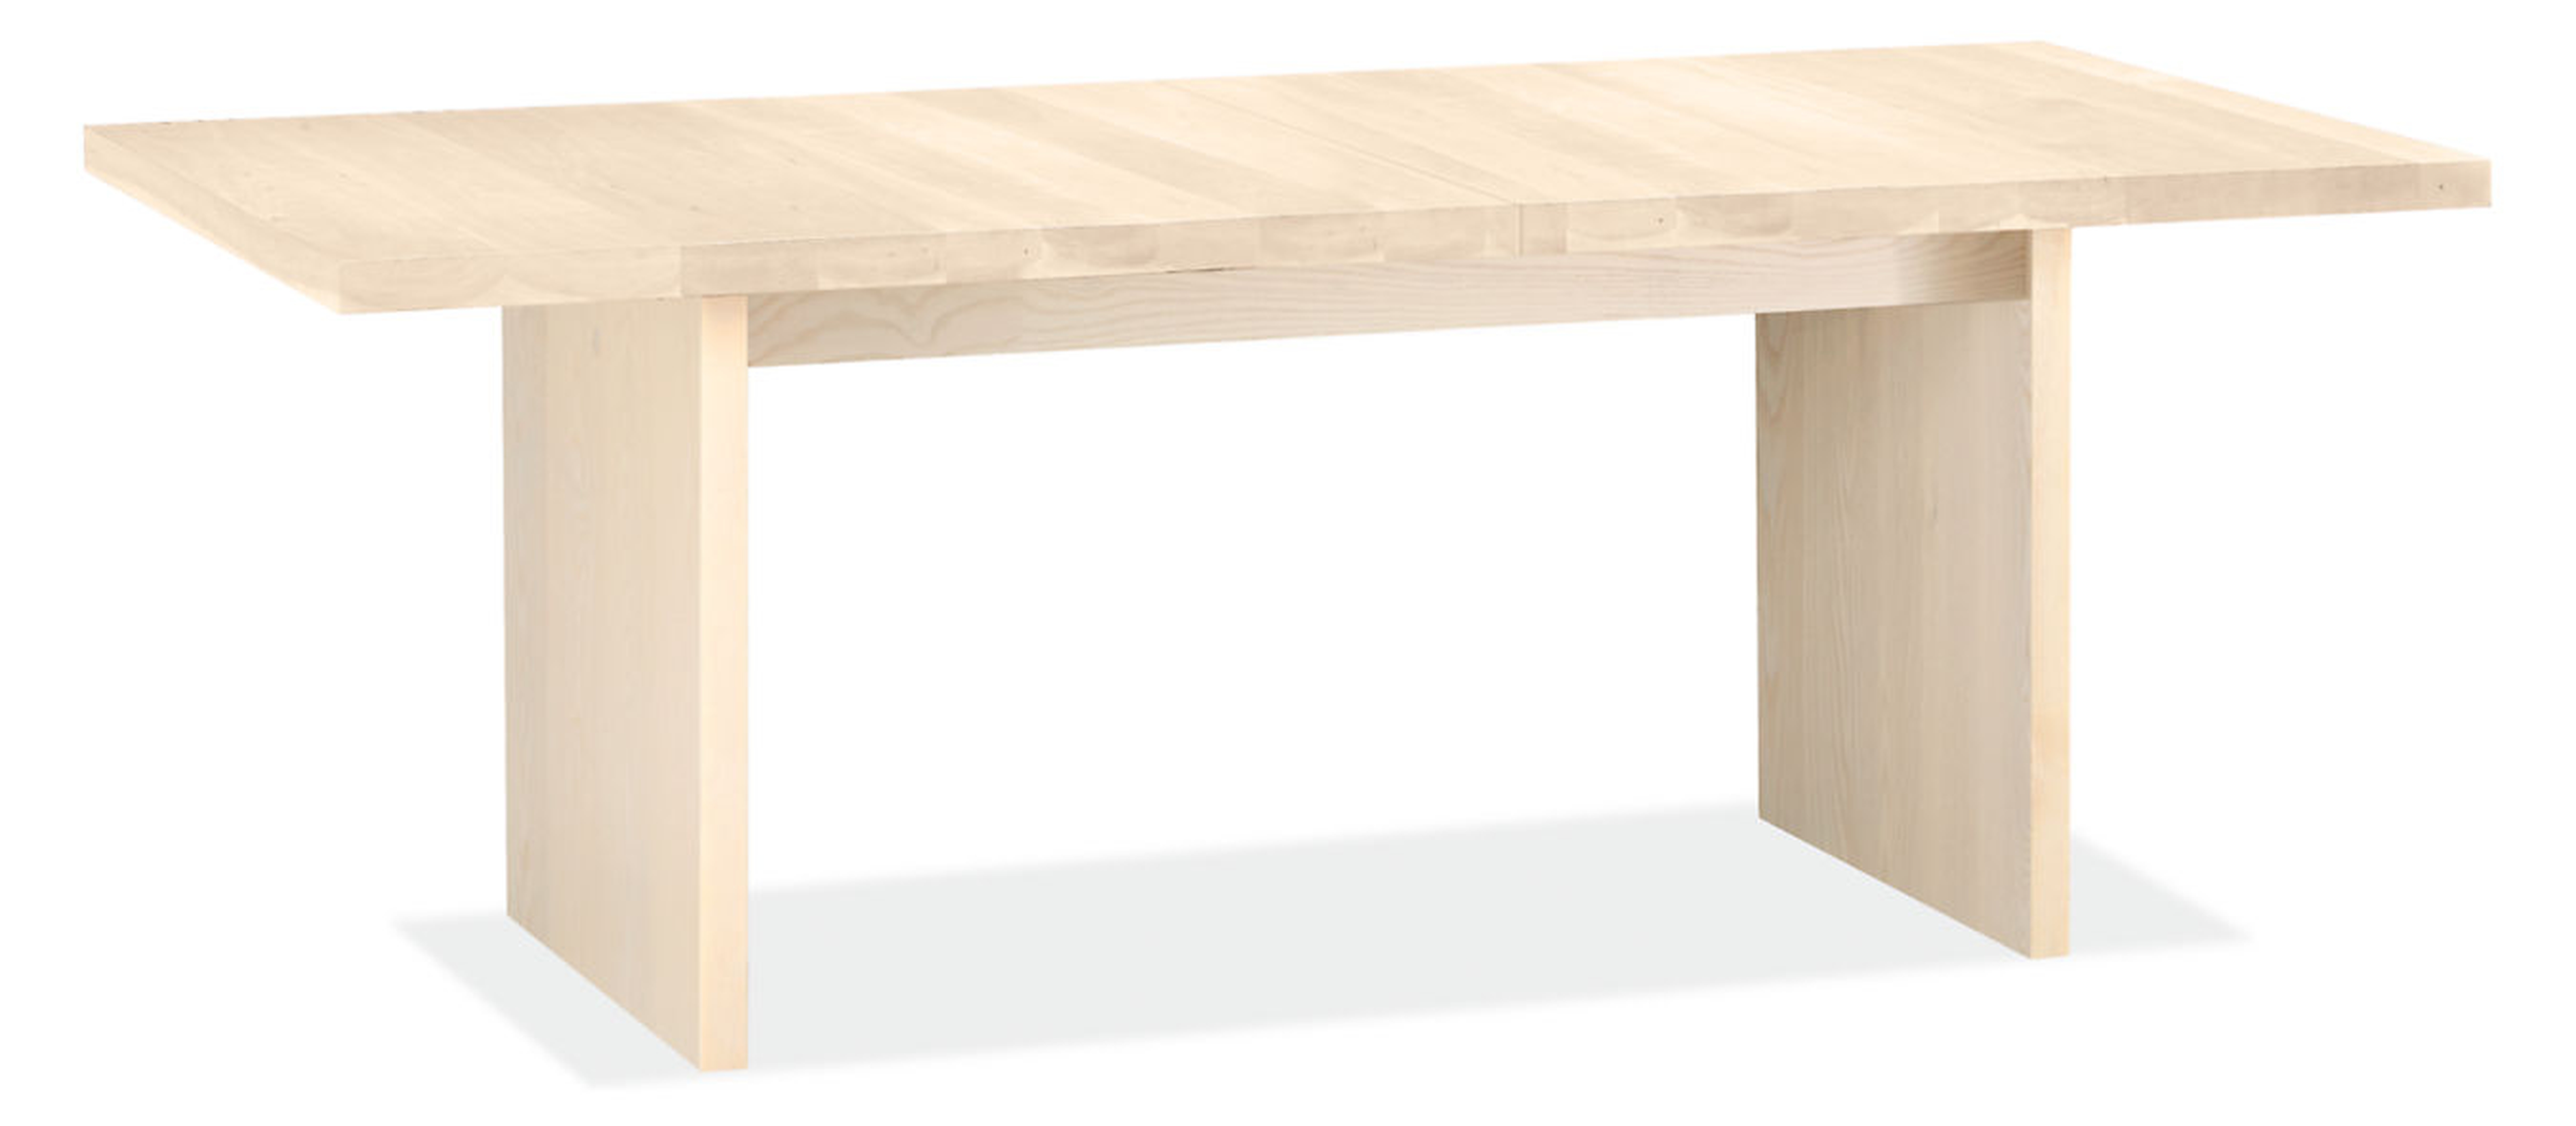 Corbett Extension Tables, Maple with shell stain - Room & Board